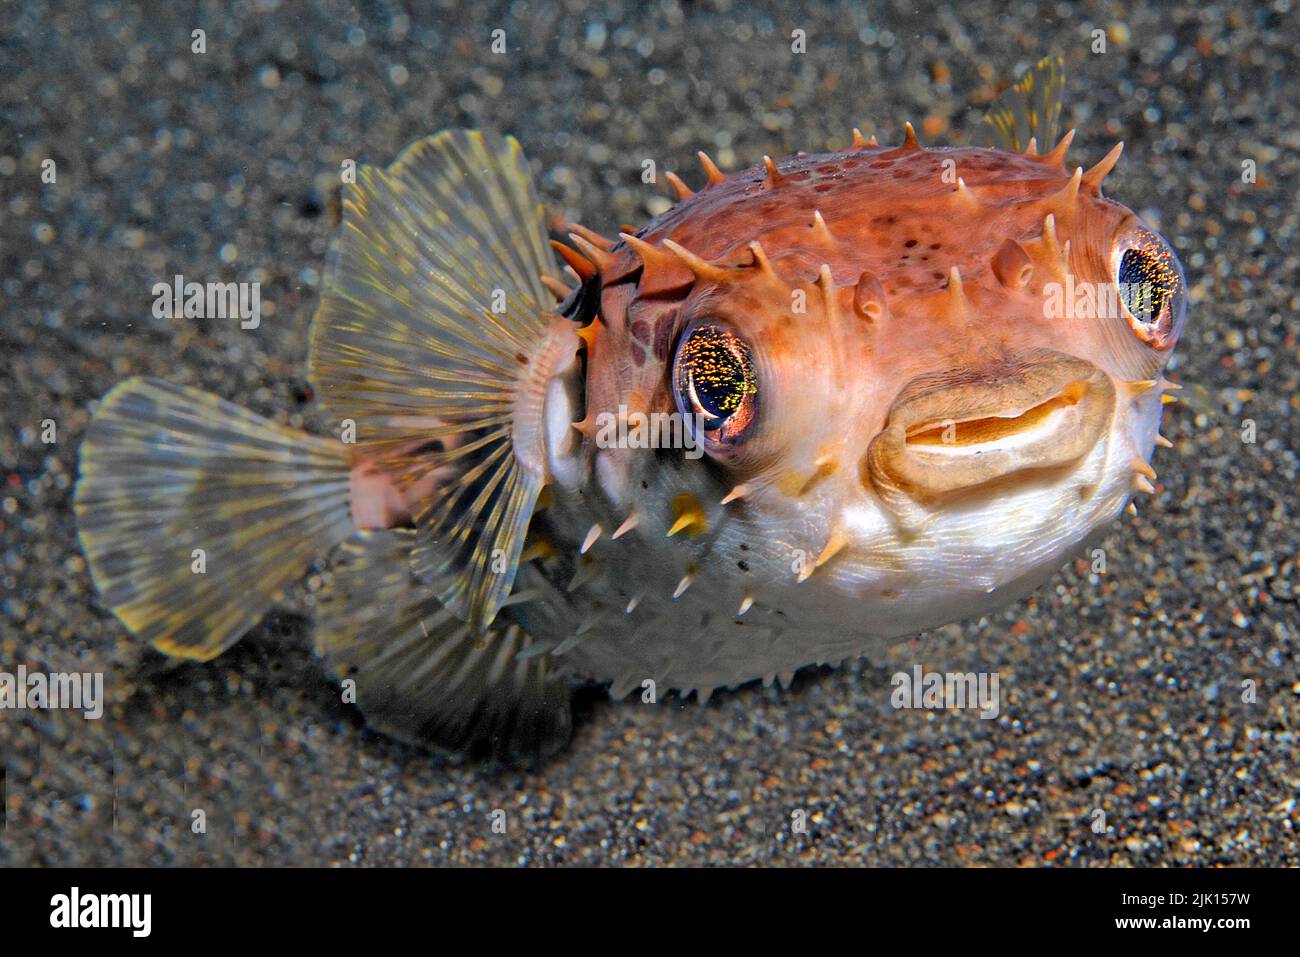 Birdbeak burrfish (Cyclichthys orbicularis), when in danger, it swallows water and pumps itself up into a ball, Sulawesi, Indonesia, Asia Stock Photo